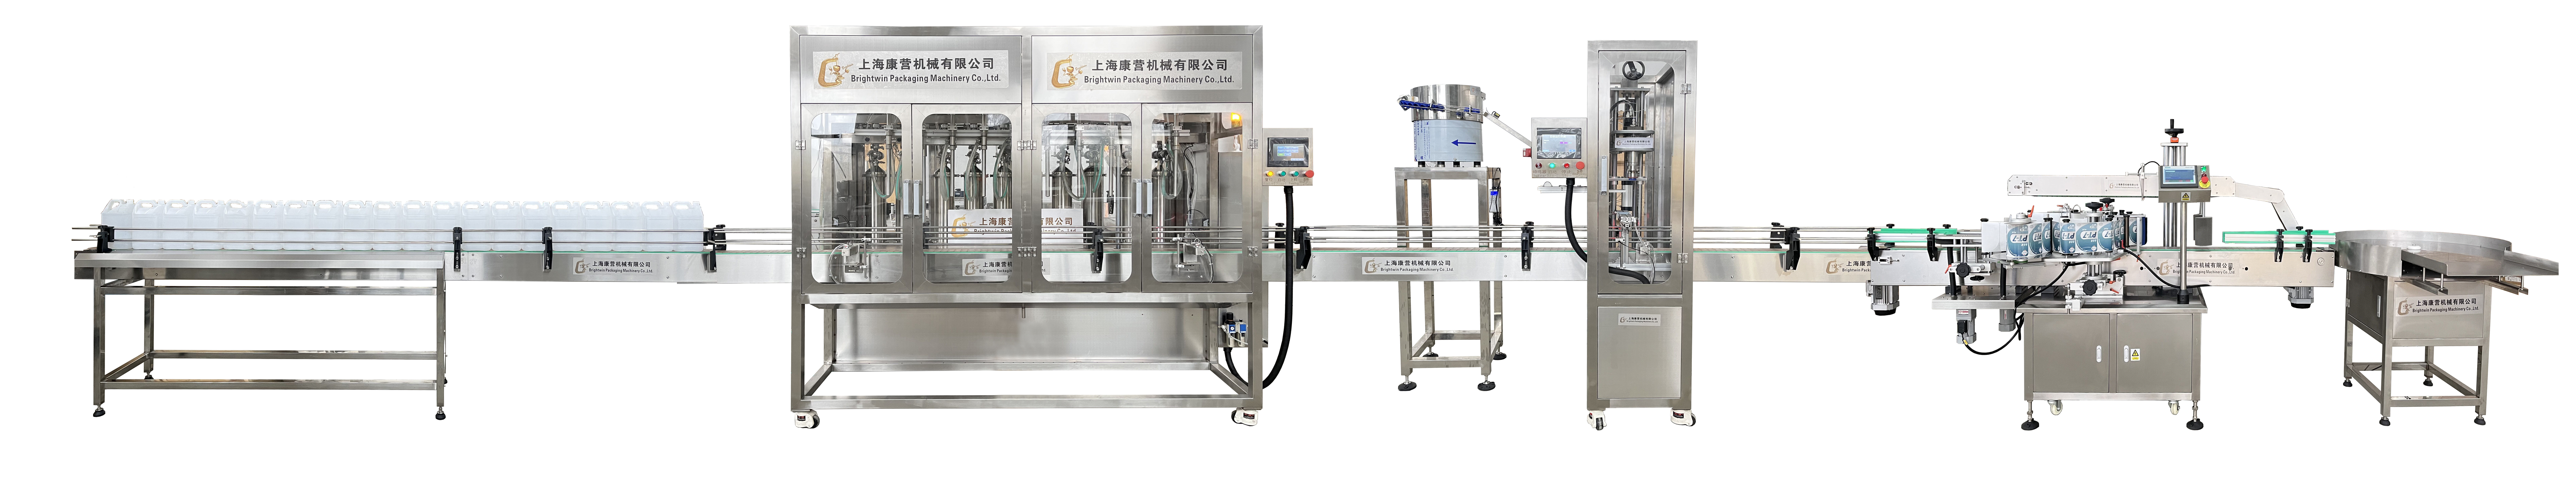 https://www.brightwingroup2.com/5l-detergent-liquid-servo-controlled-piston-pump-filing-screw-capping-double-sides-labeling-machine-line-for-a-czech-customer-product/